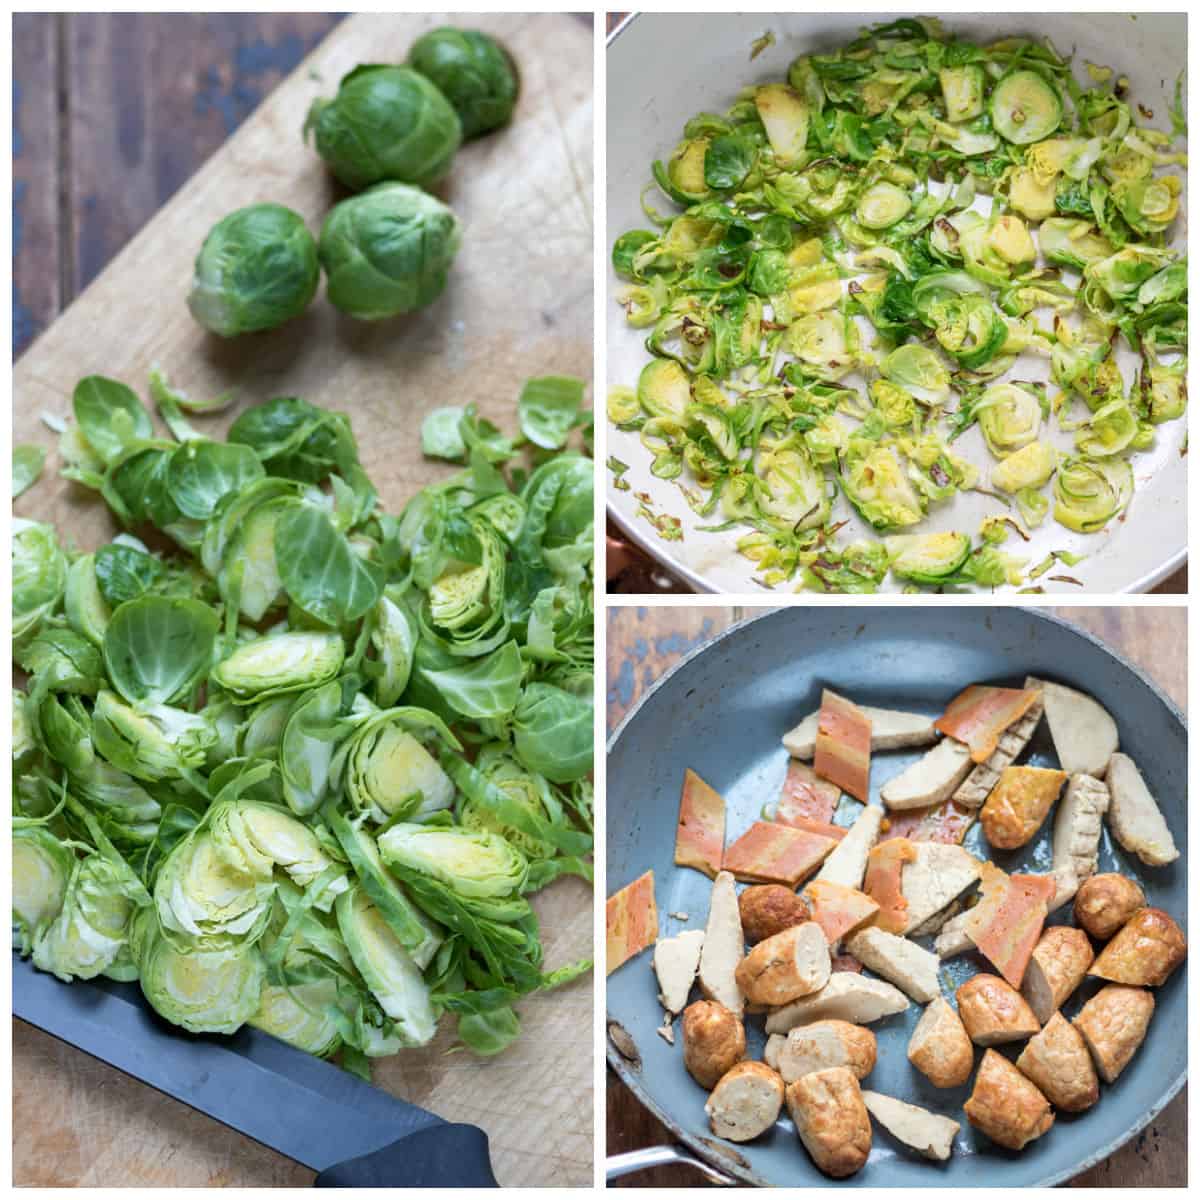 Collage of sliced brussels sprouts, cooked sprouts and pan frying leftover veggie meats.